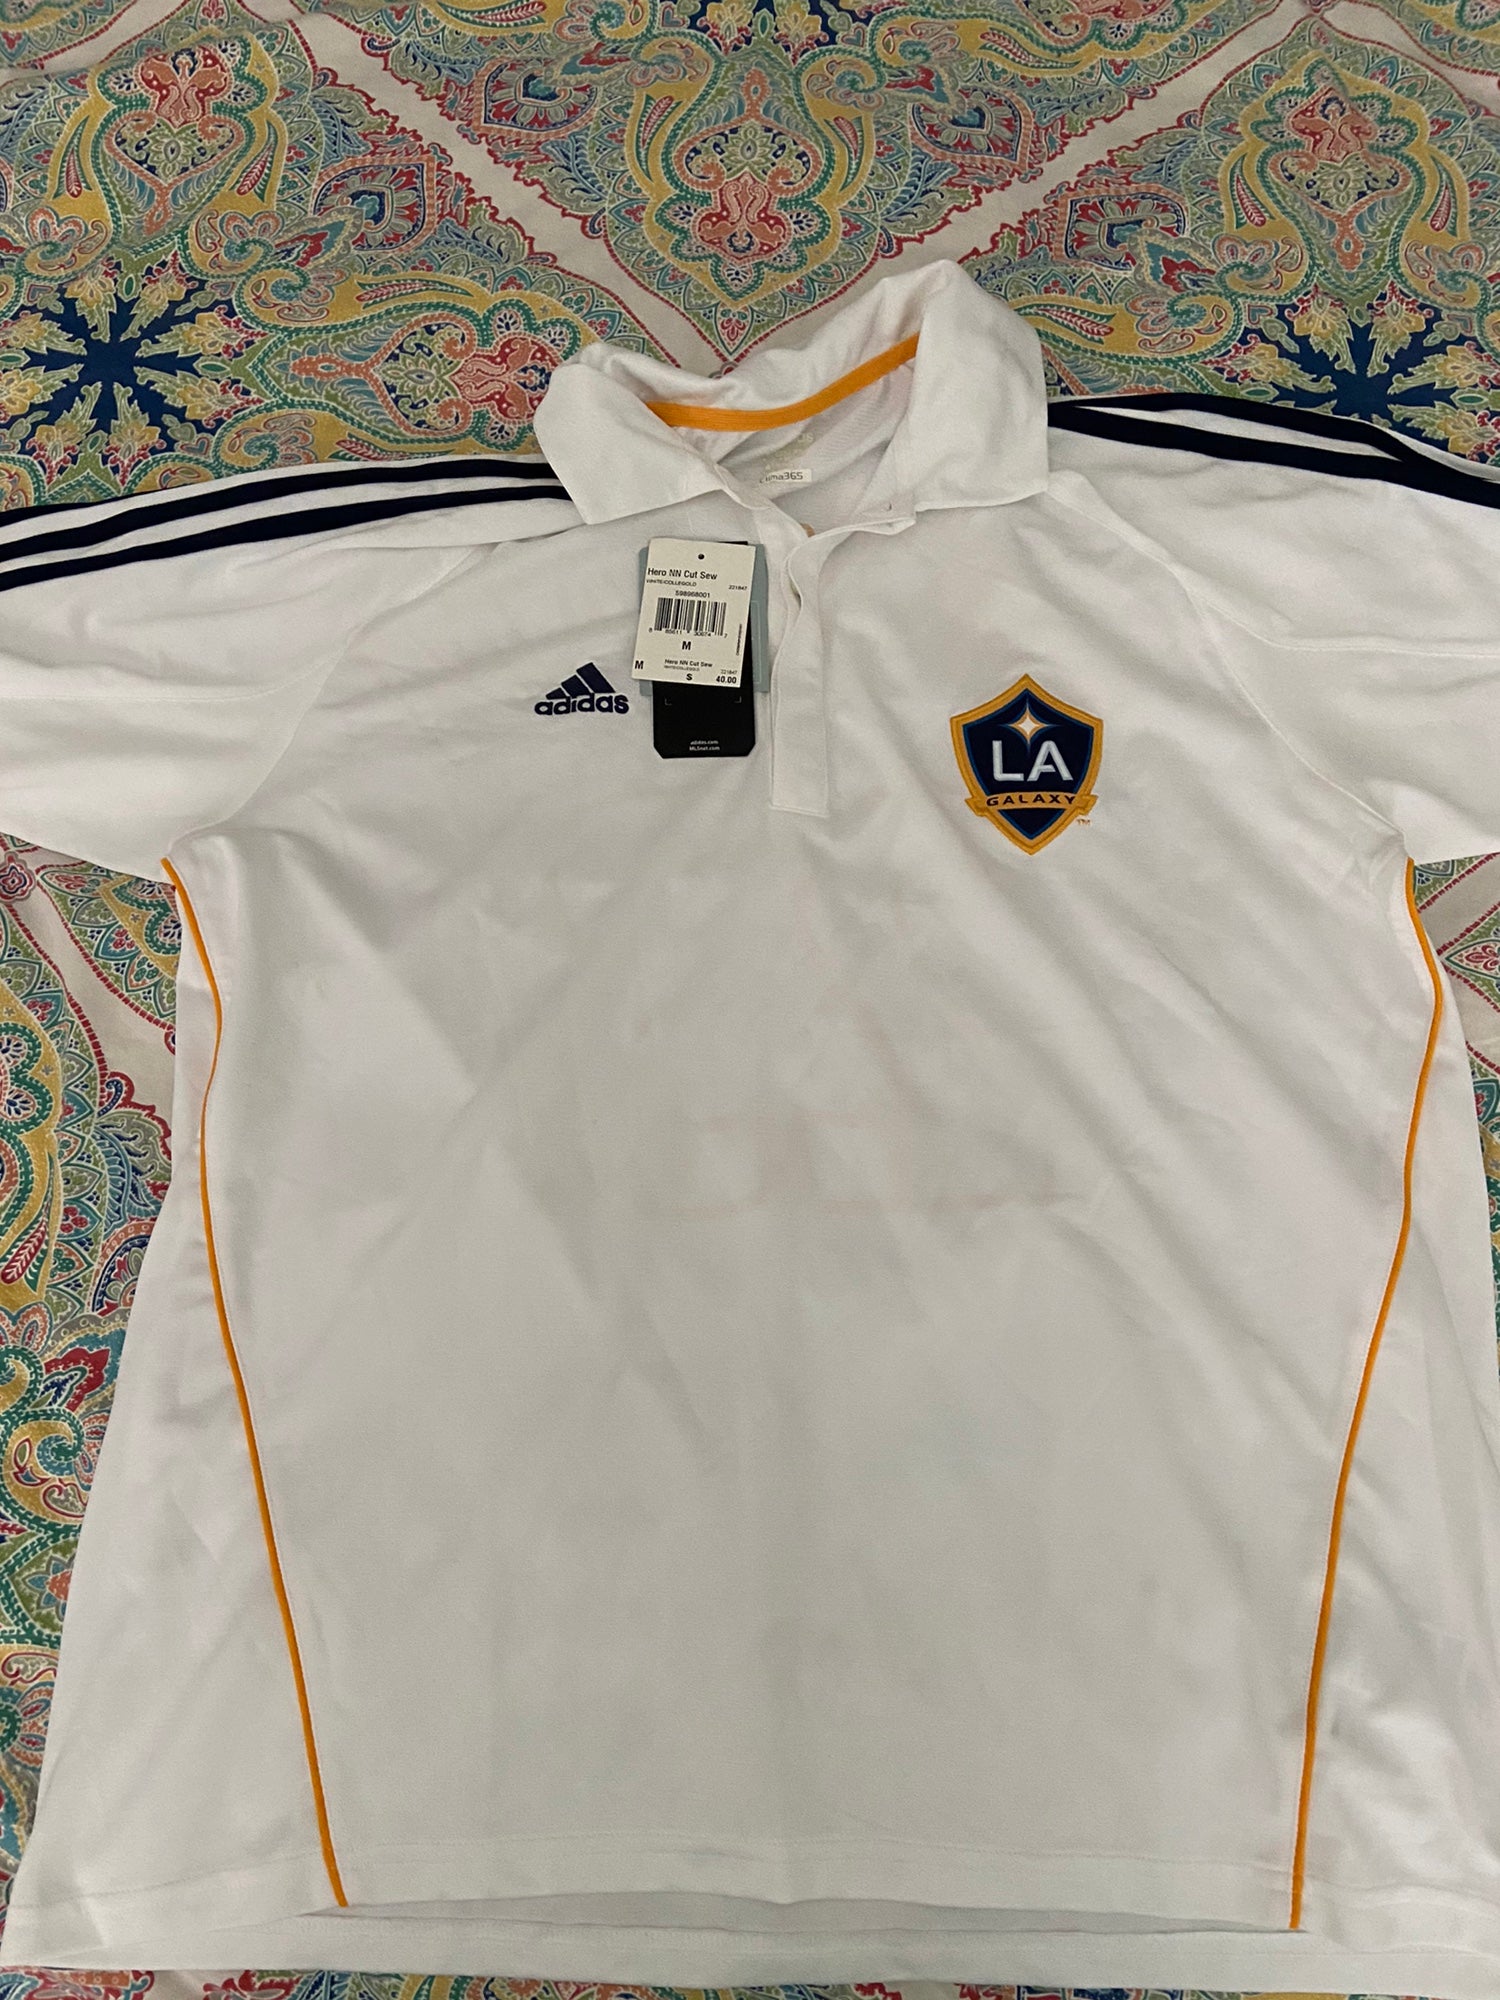 MLS Authentic Mitchell & Ness LA Galaxy Soccer Jersey New Mens Sizes $65